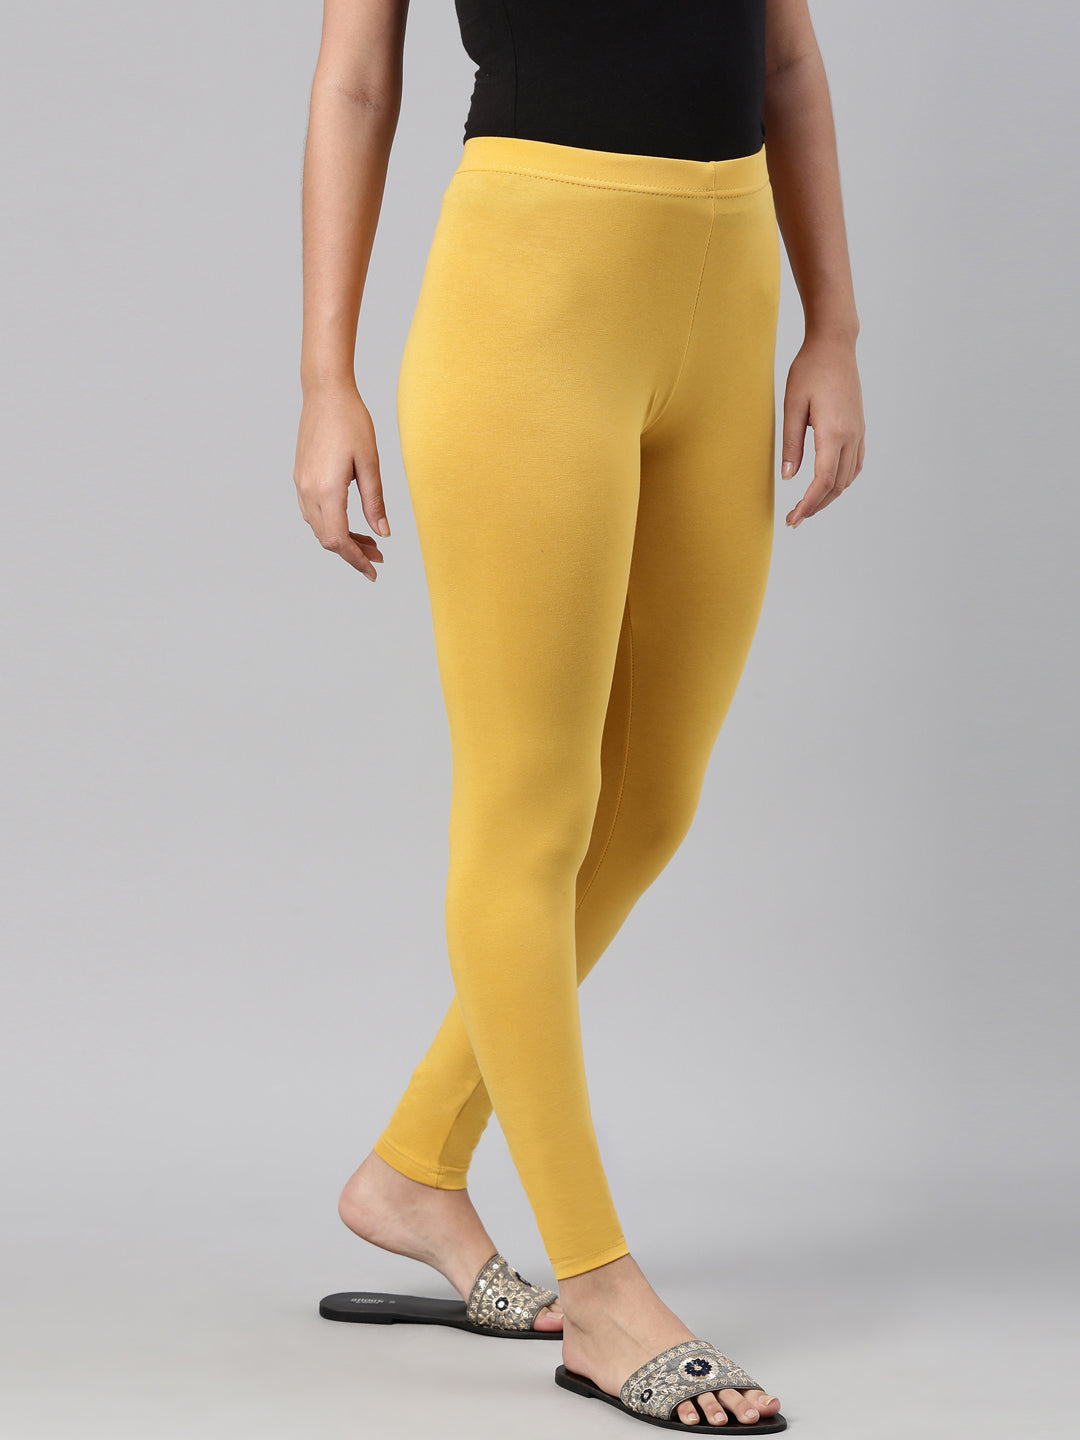 LOGO Layers by Lori Goldstein Tall Knit Pull-On Ankle Leggings - QVC.com